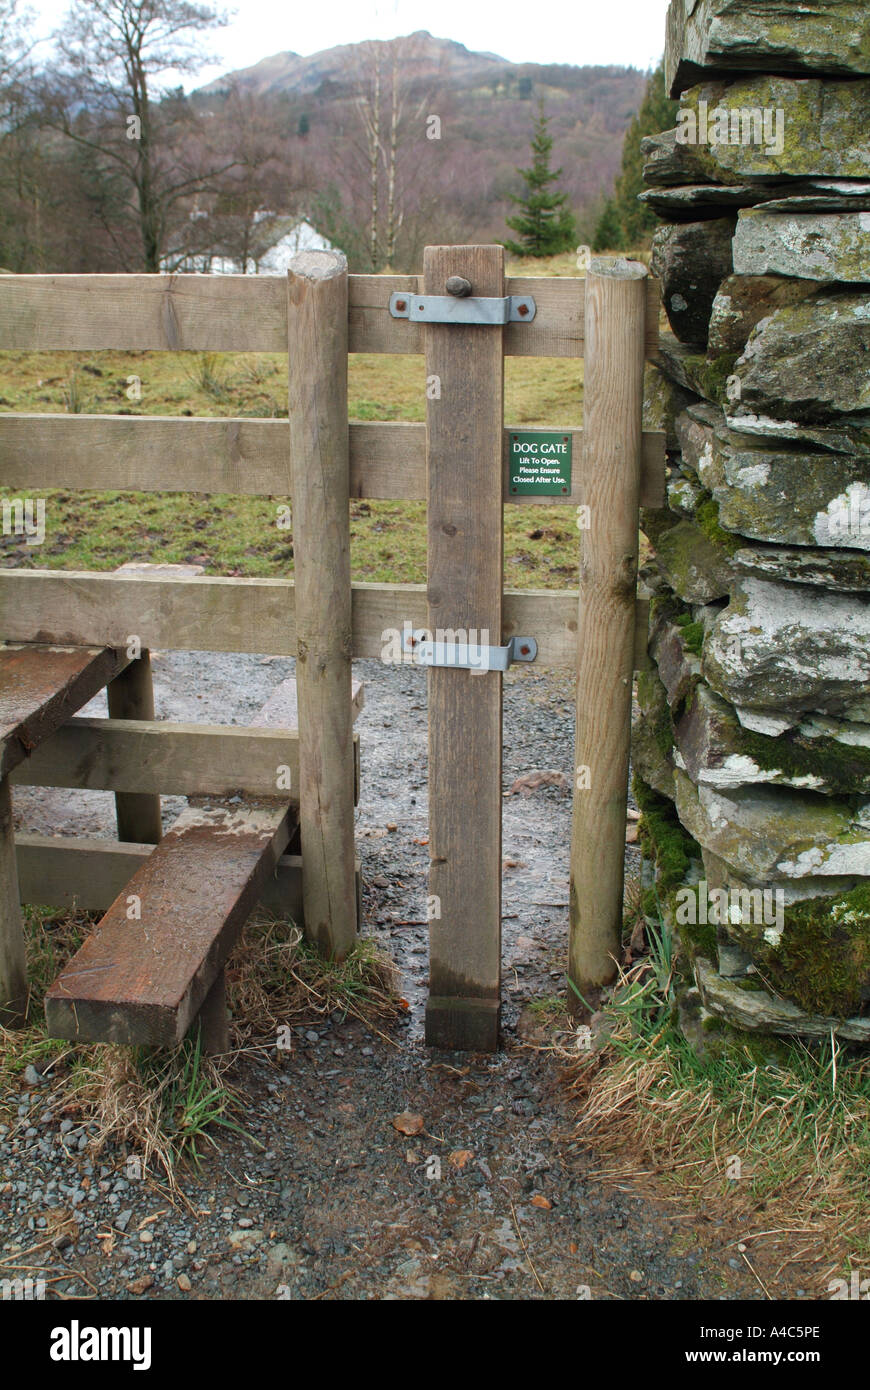 Dog gate next to a stile in the Lake District, Cumbria, England, UK. Stock Photo